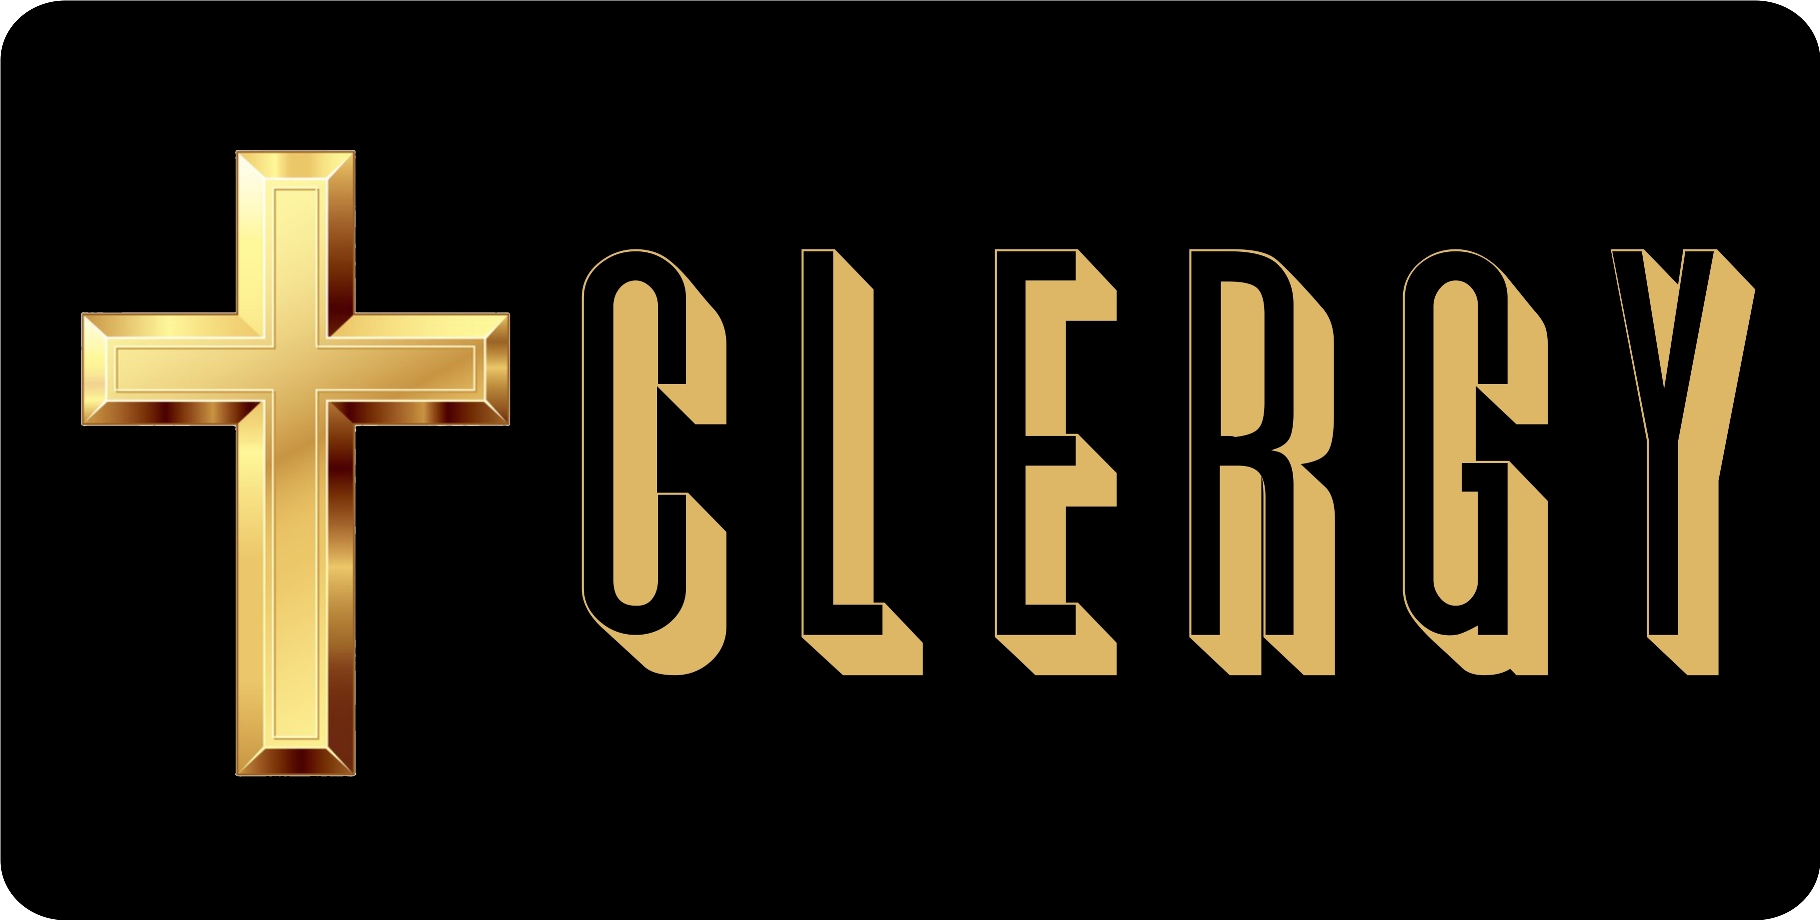 Clergy In GOLD Photo License Plate